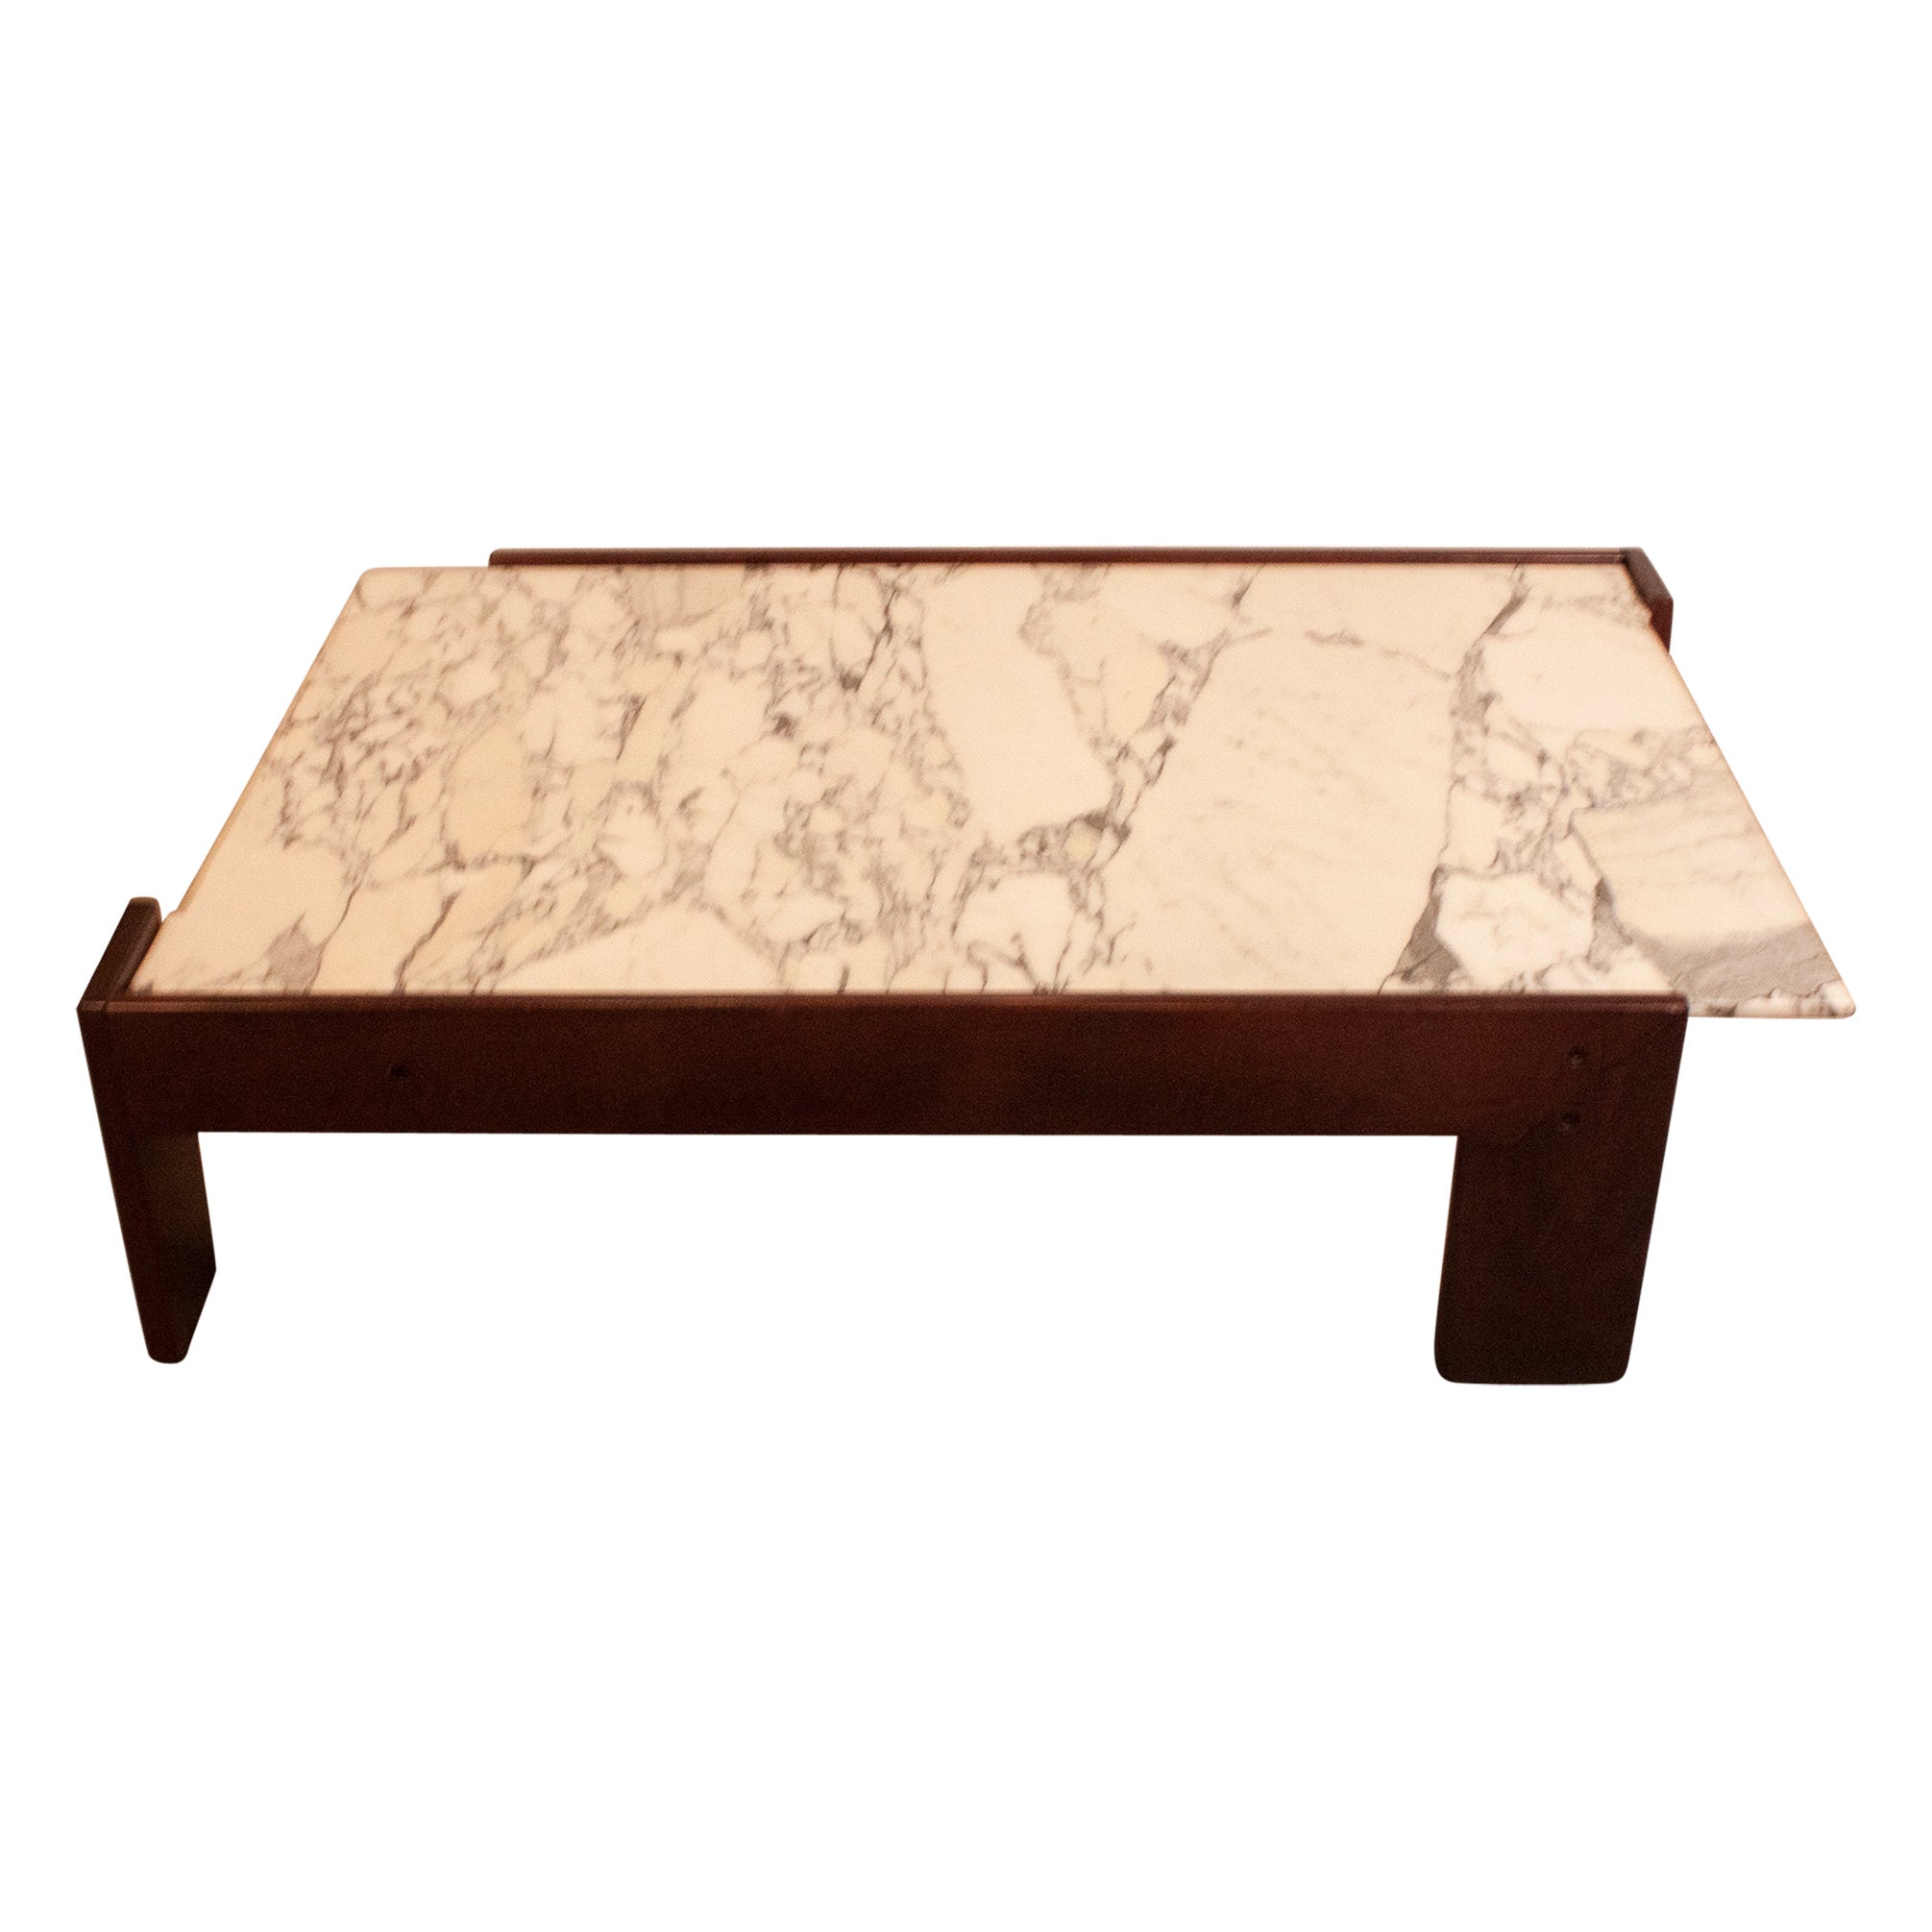 Coffee Table, Wood and Marble Designed by Antonio Moragas, Spain, 1970's For Sale